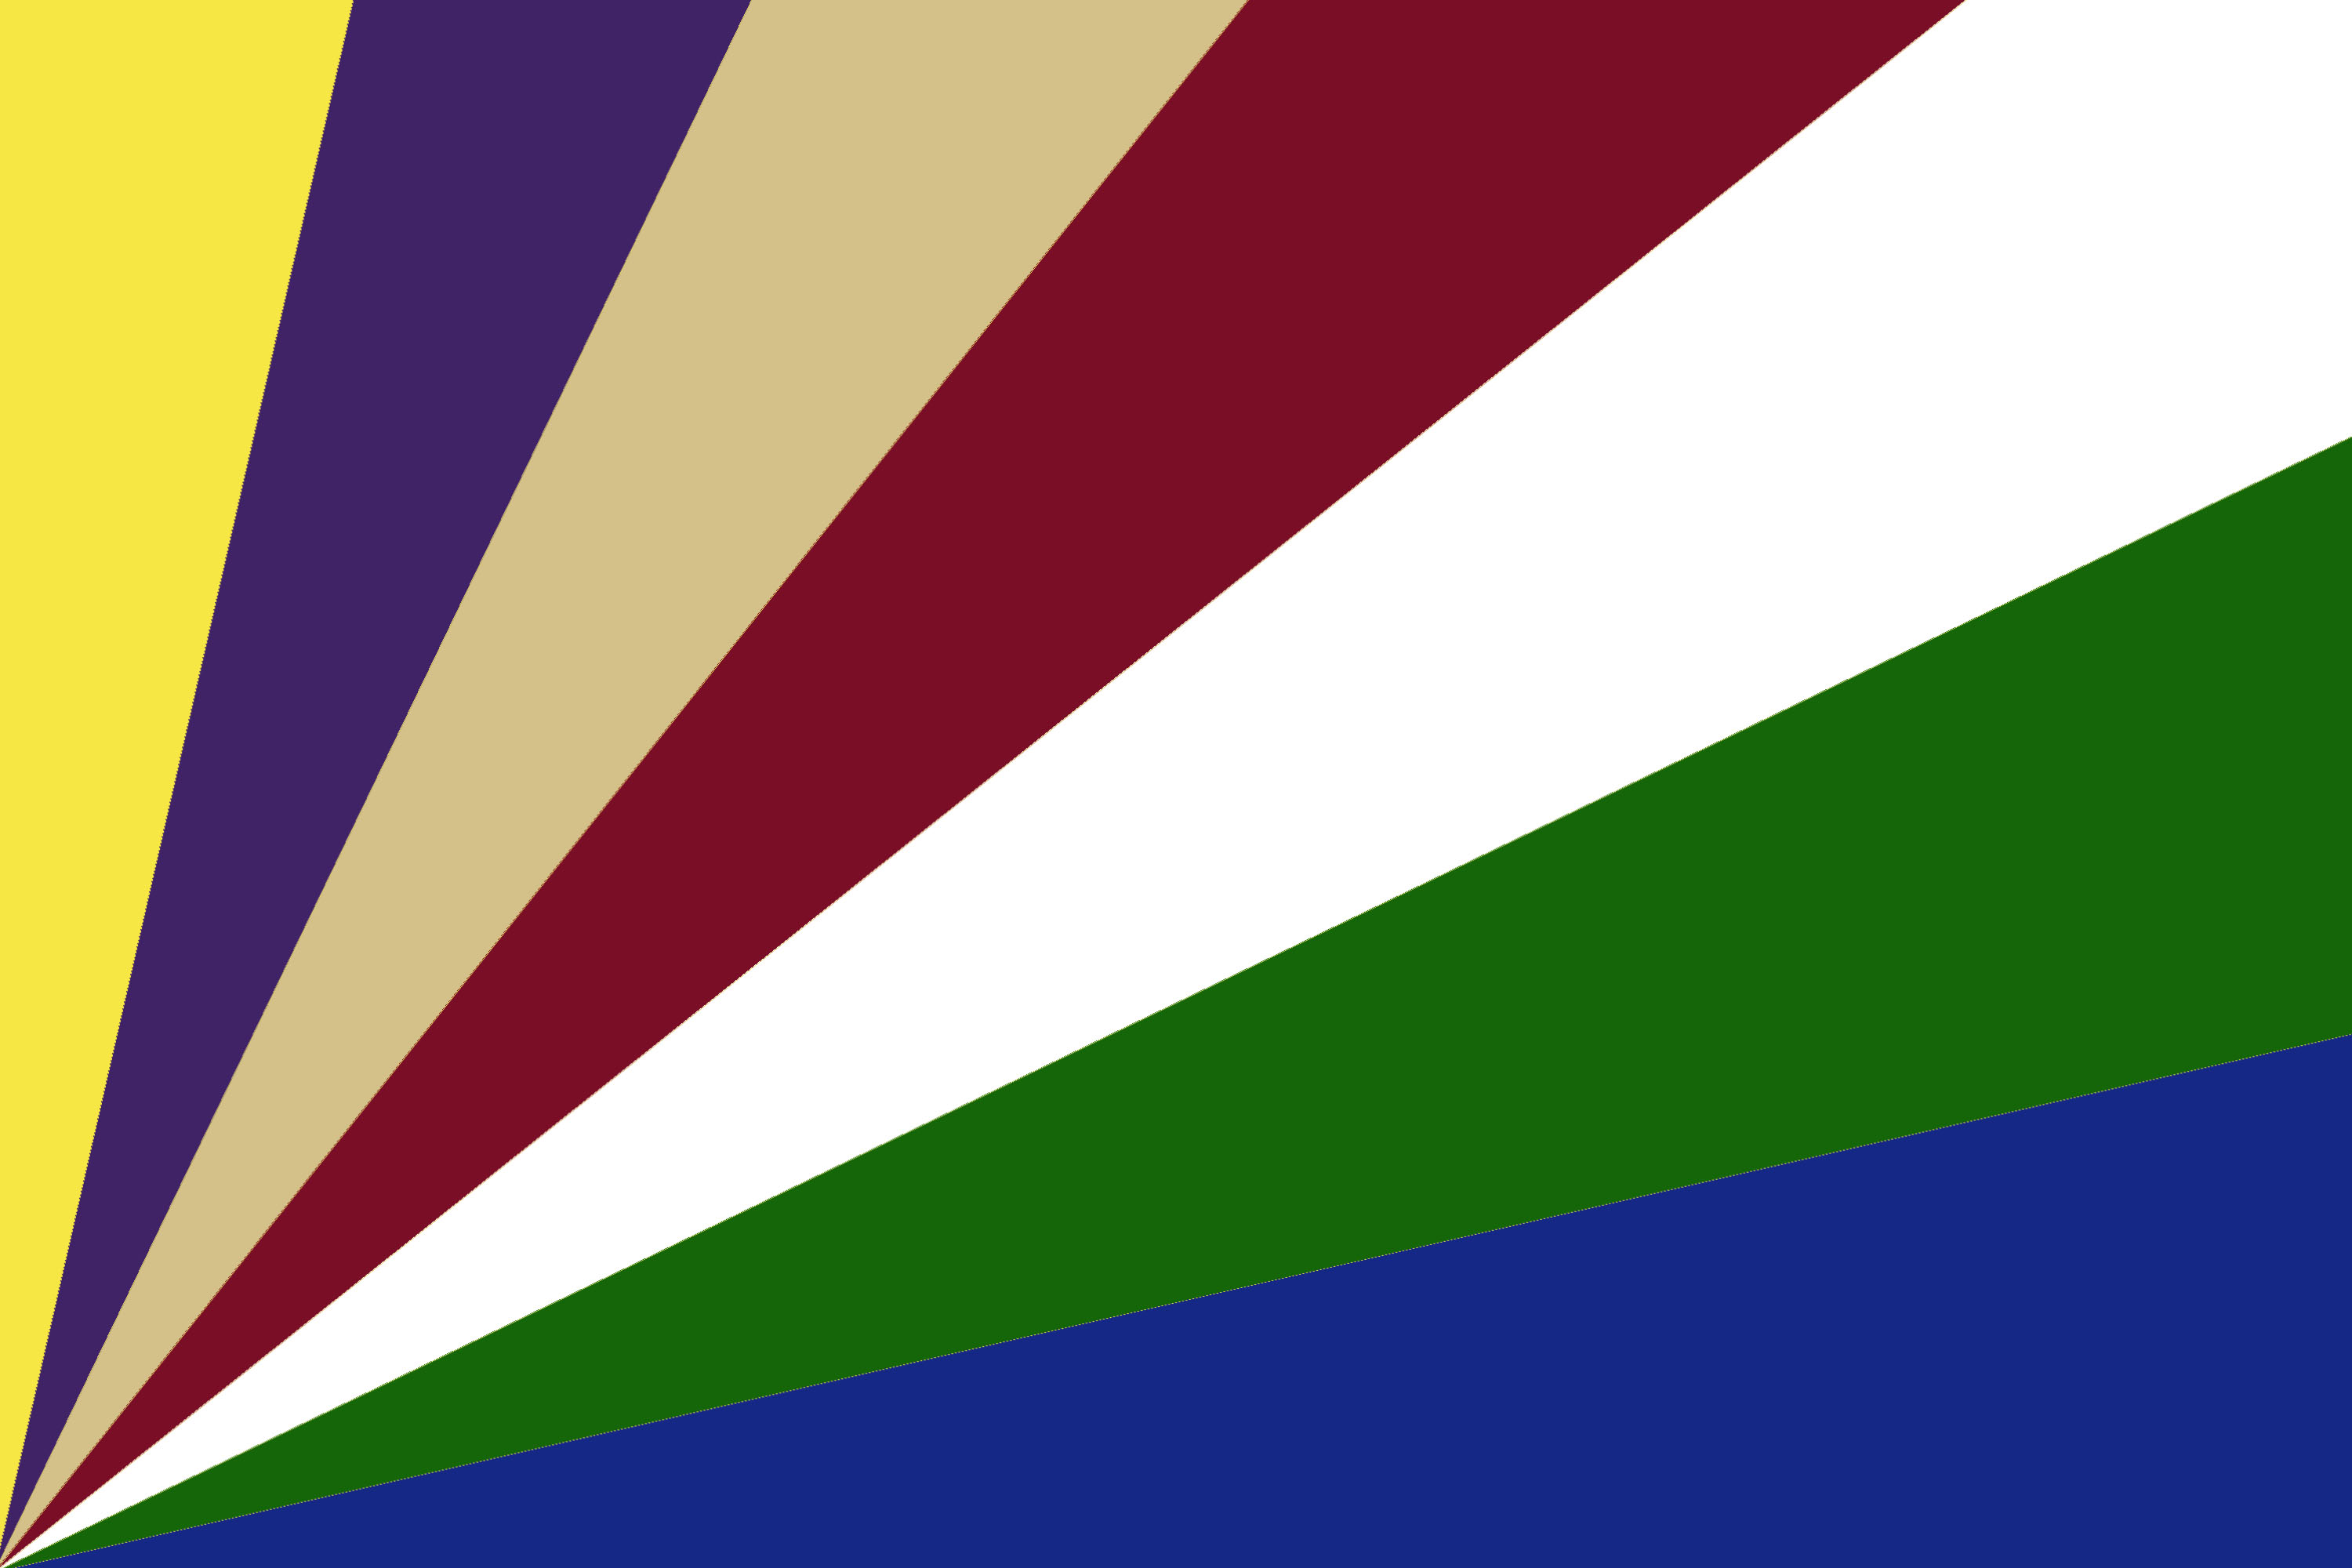 November 2013 Design Contest Submission Thread : vexillology